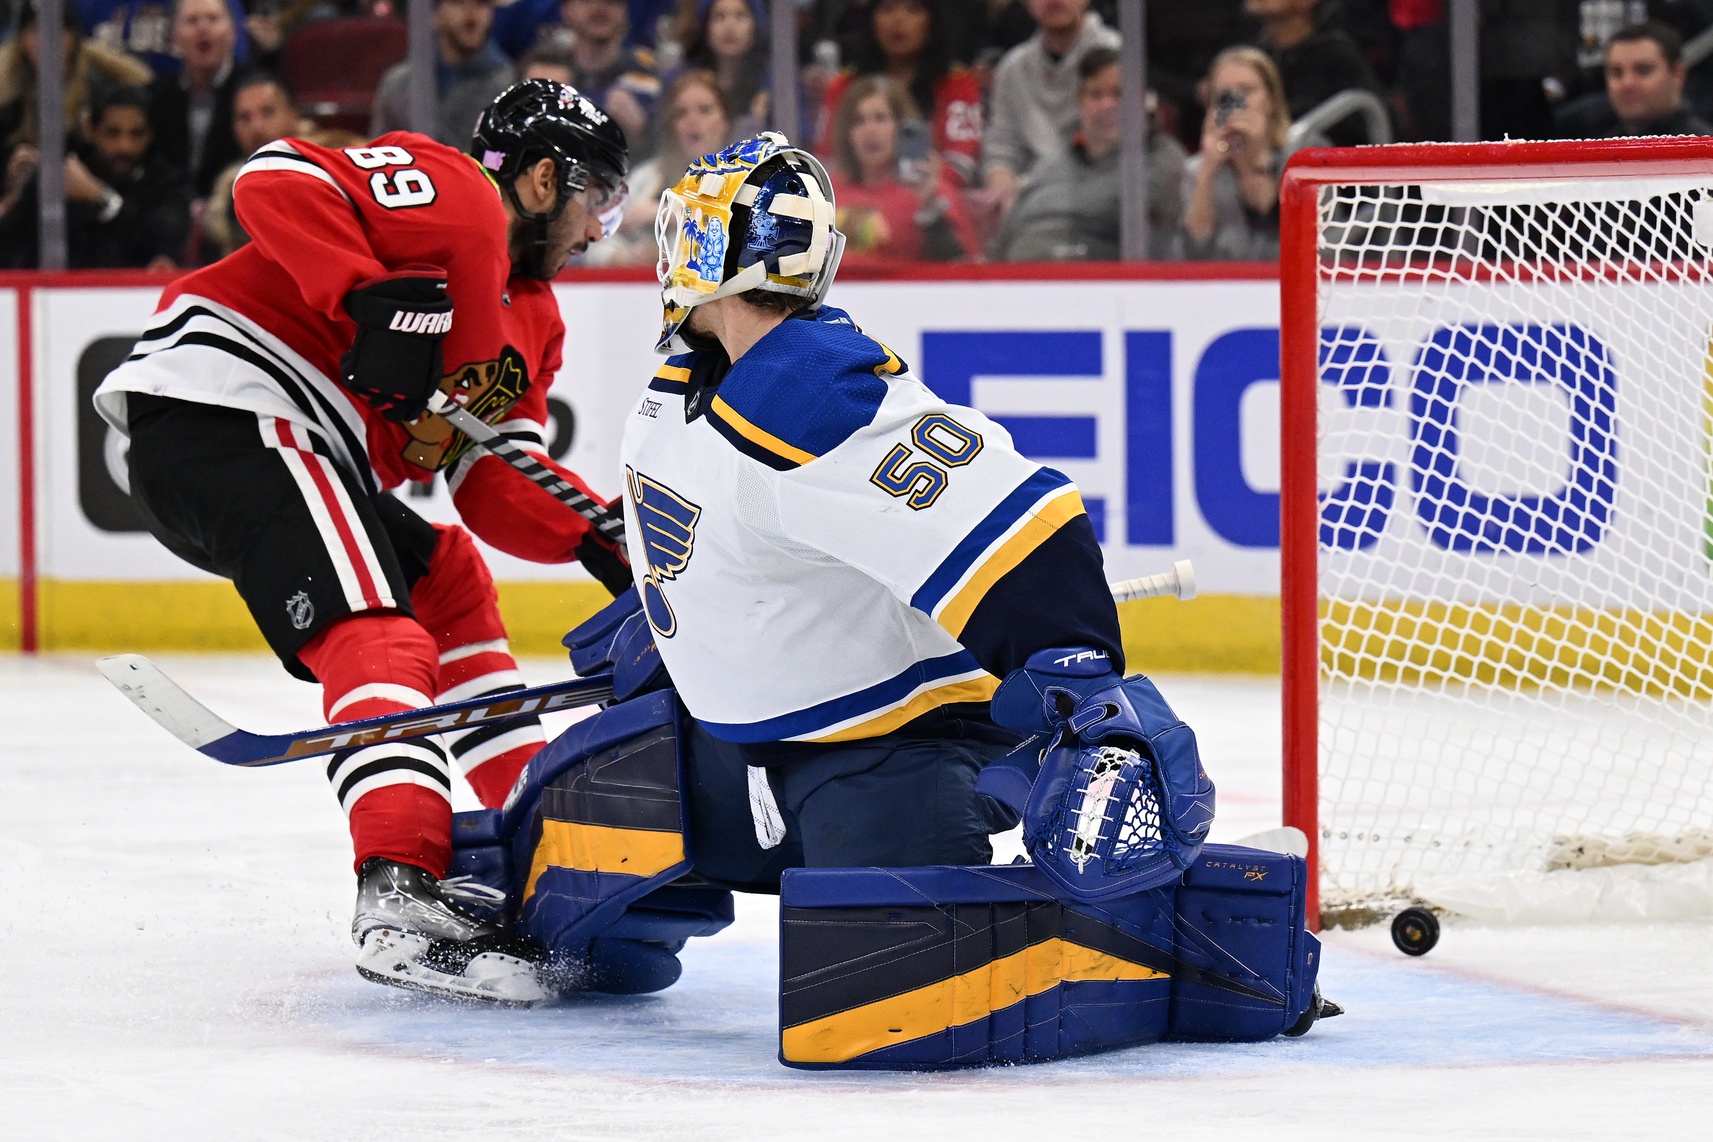 Jordan Binnington stretches out for terrific save to secure Blues